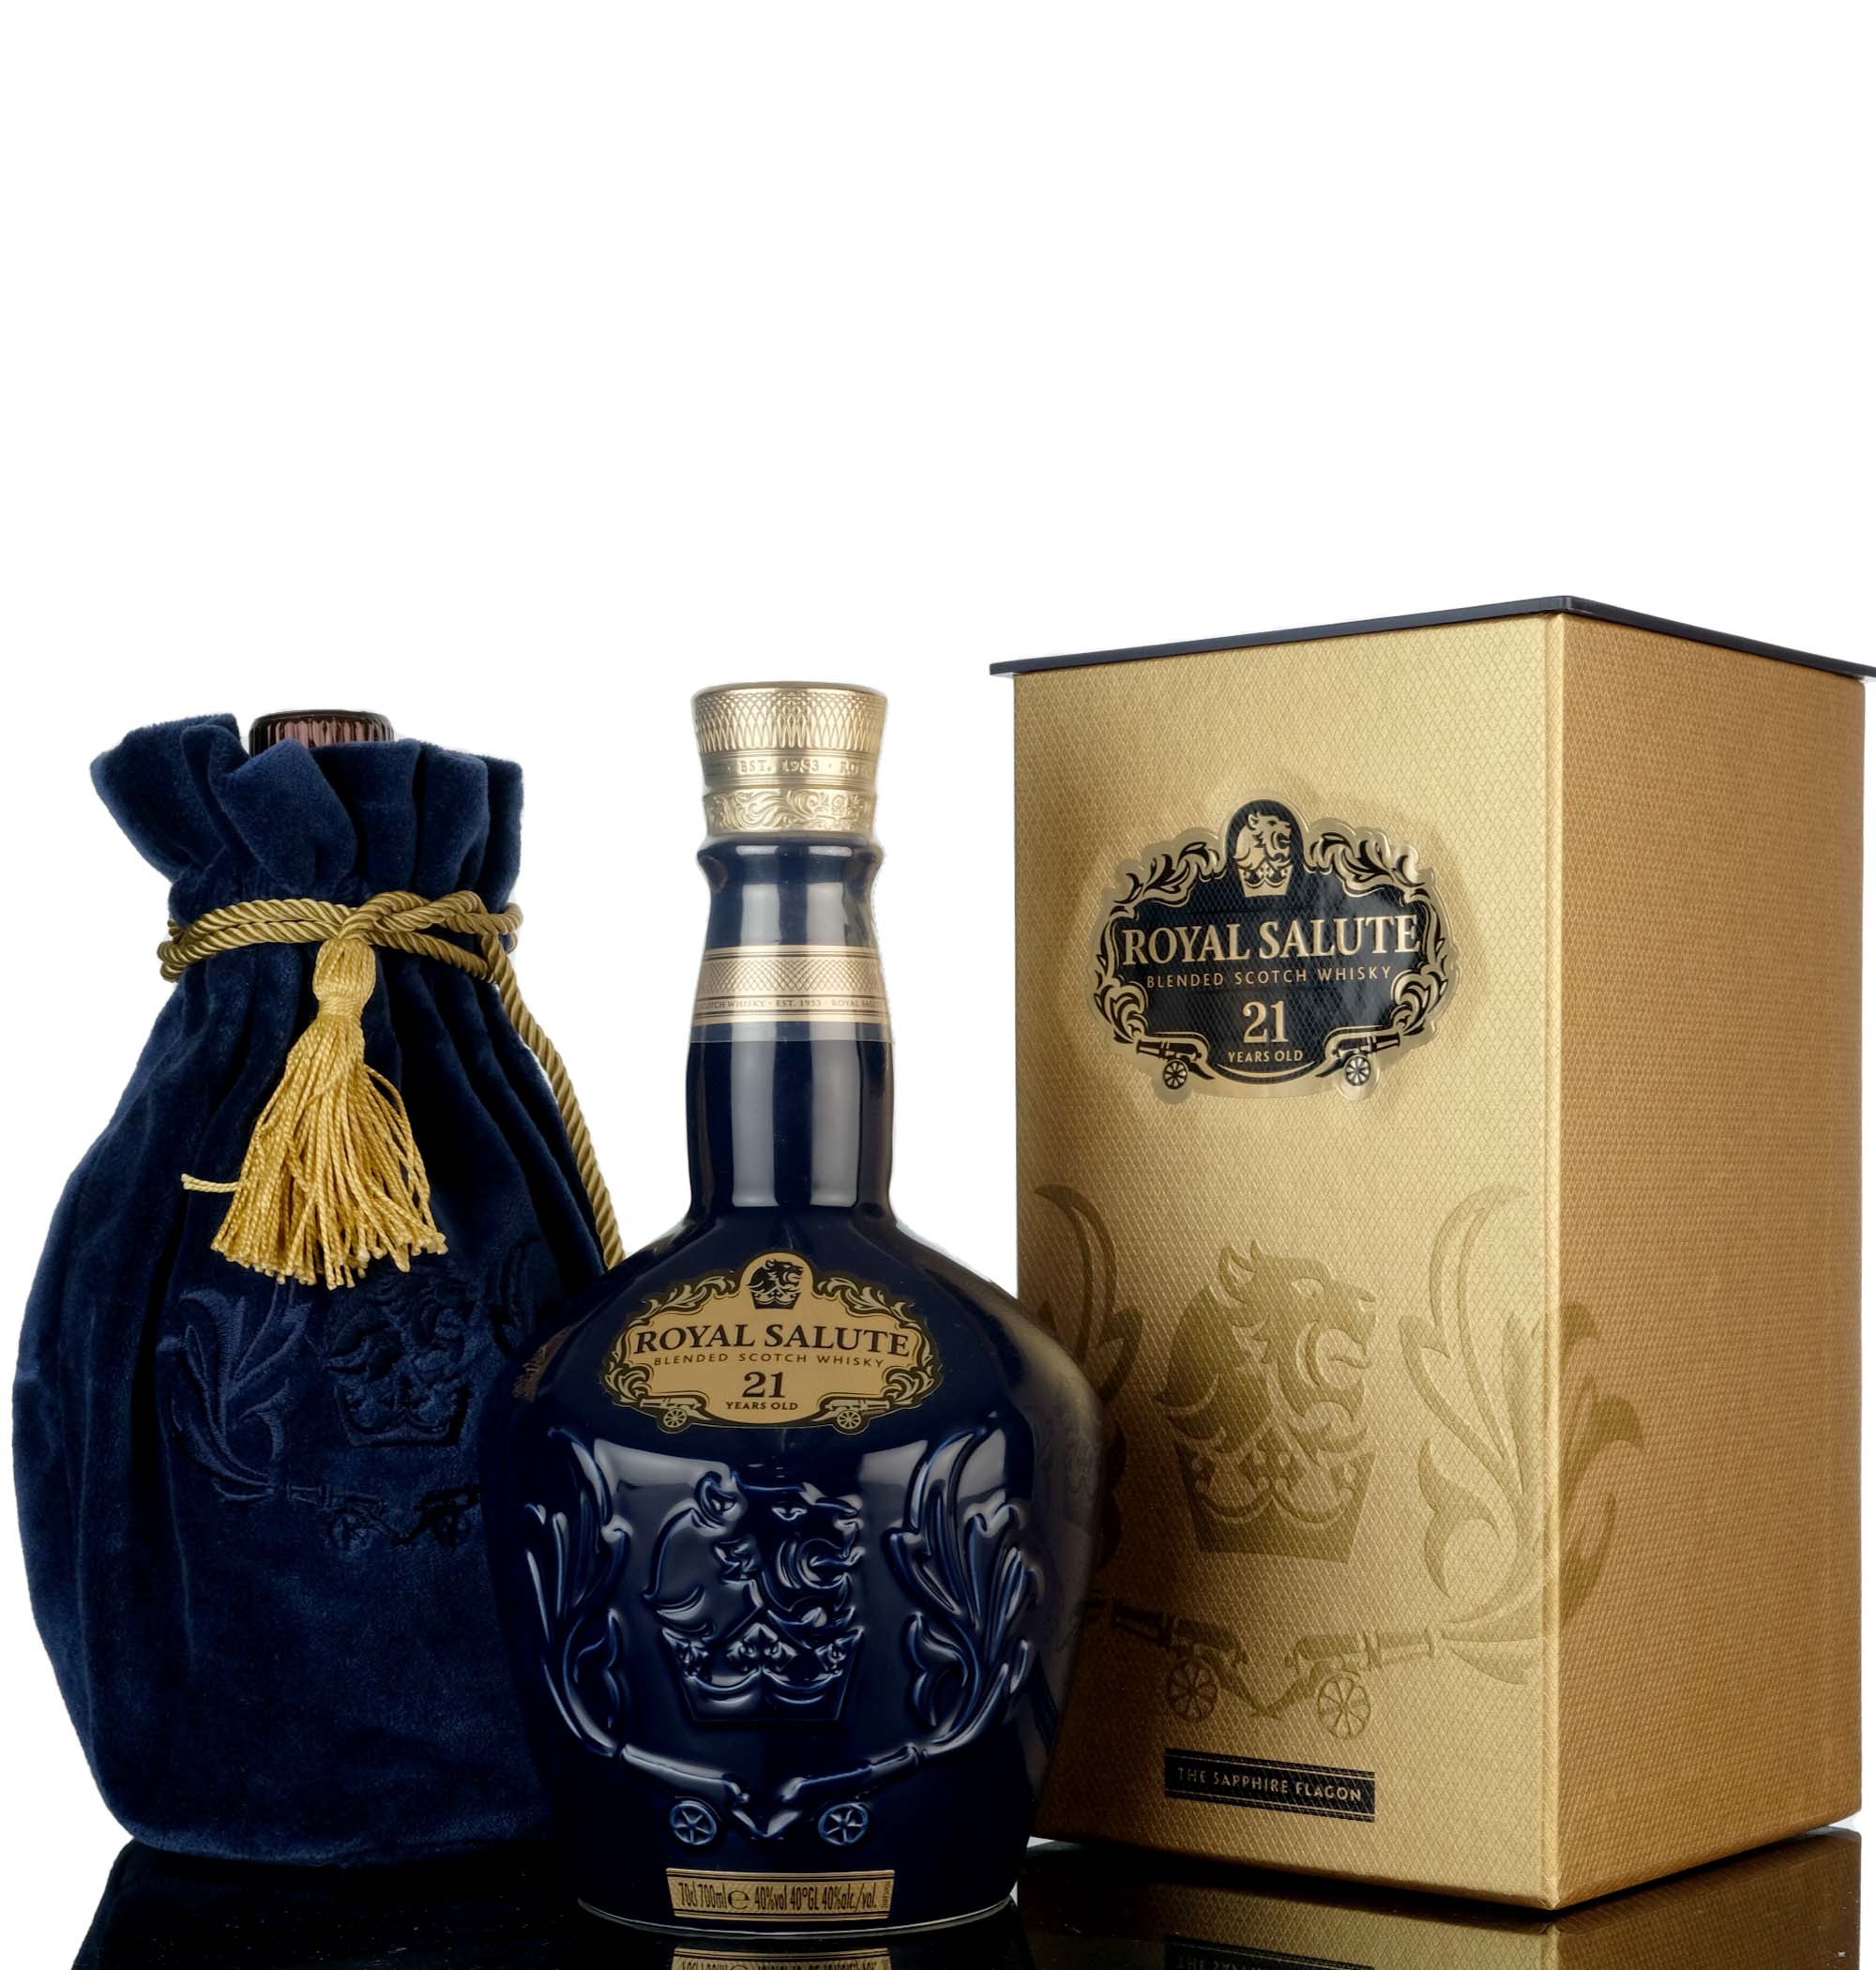 Royal Salute 21 Year Old - Sapphire Ceramic - 2017 Release